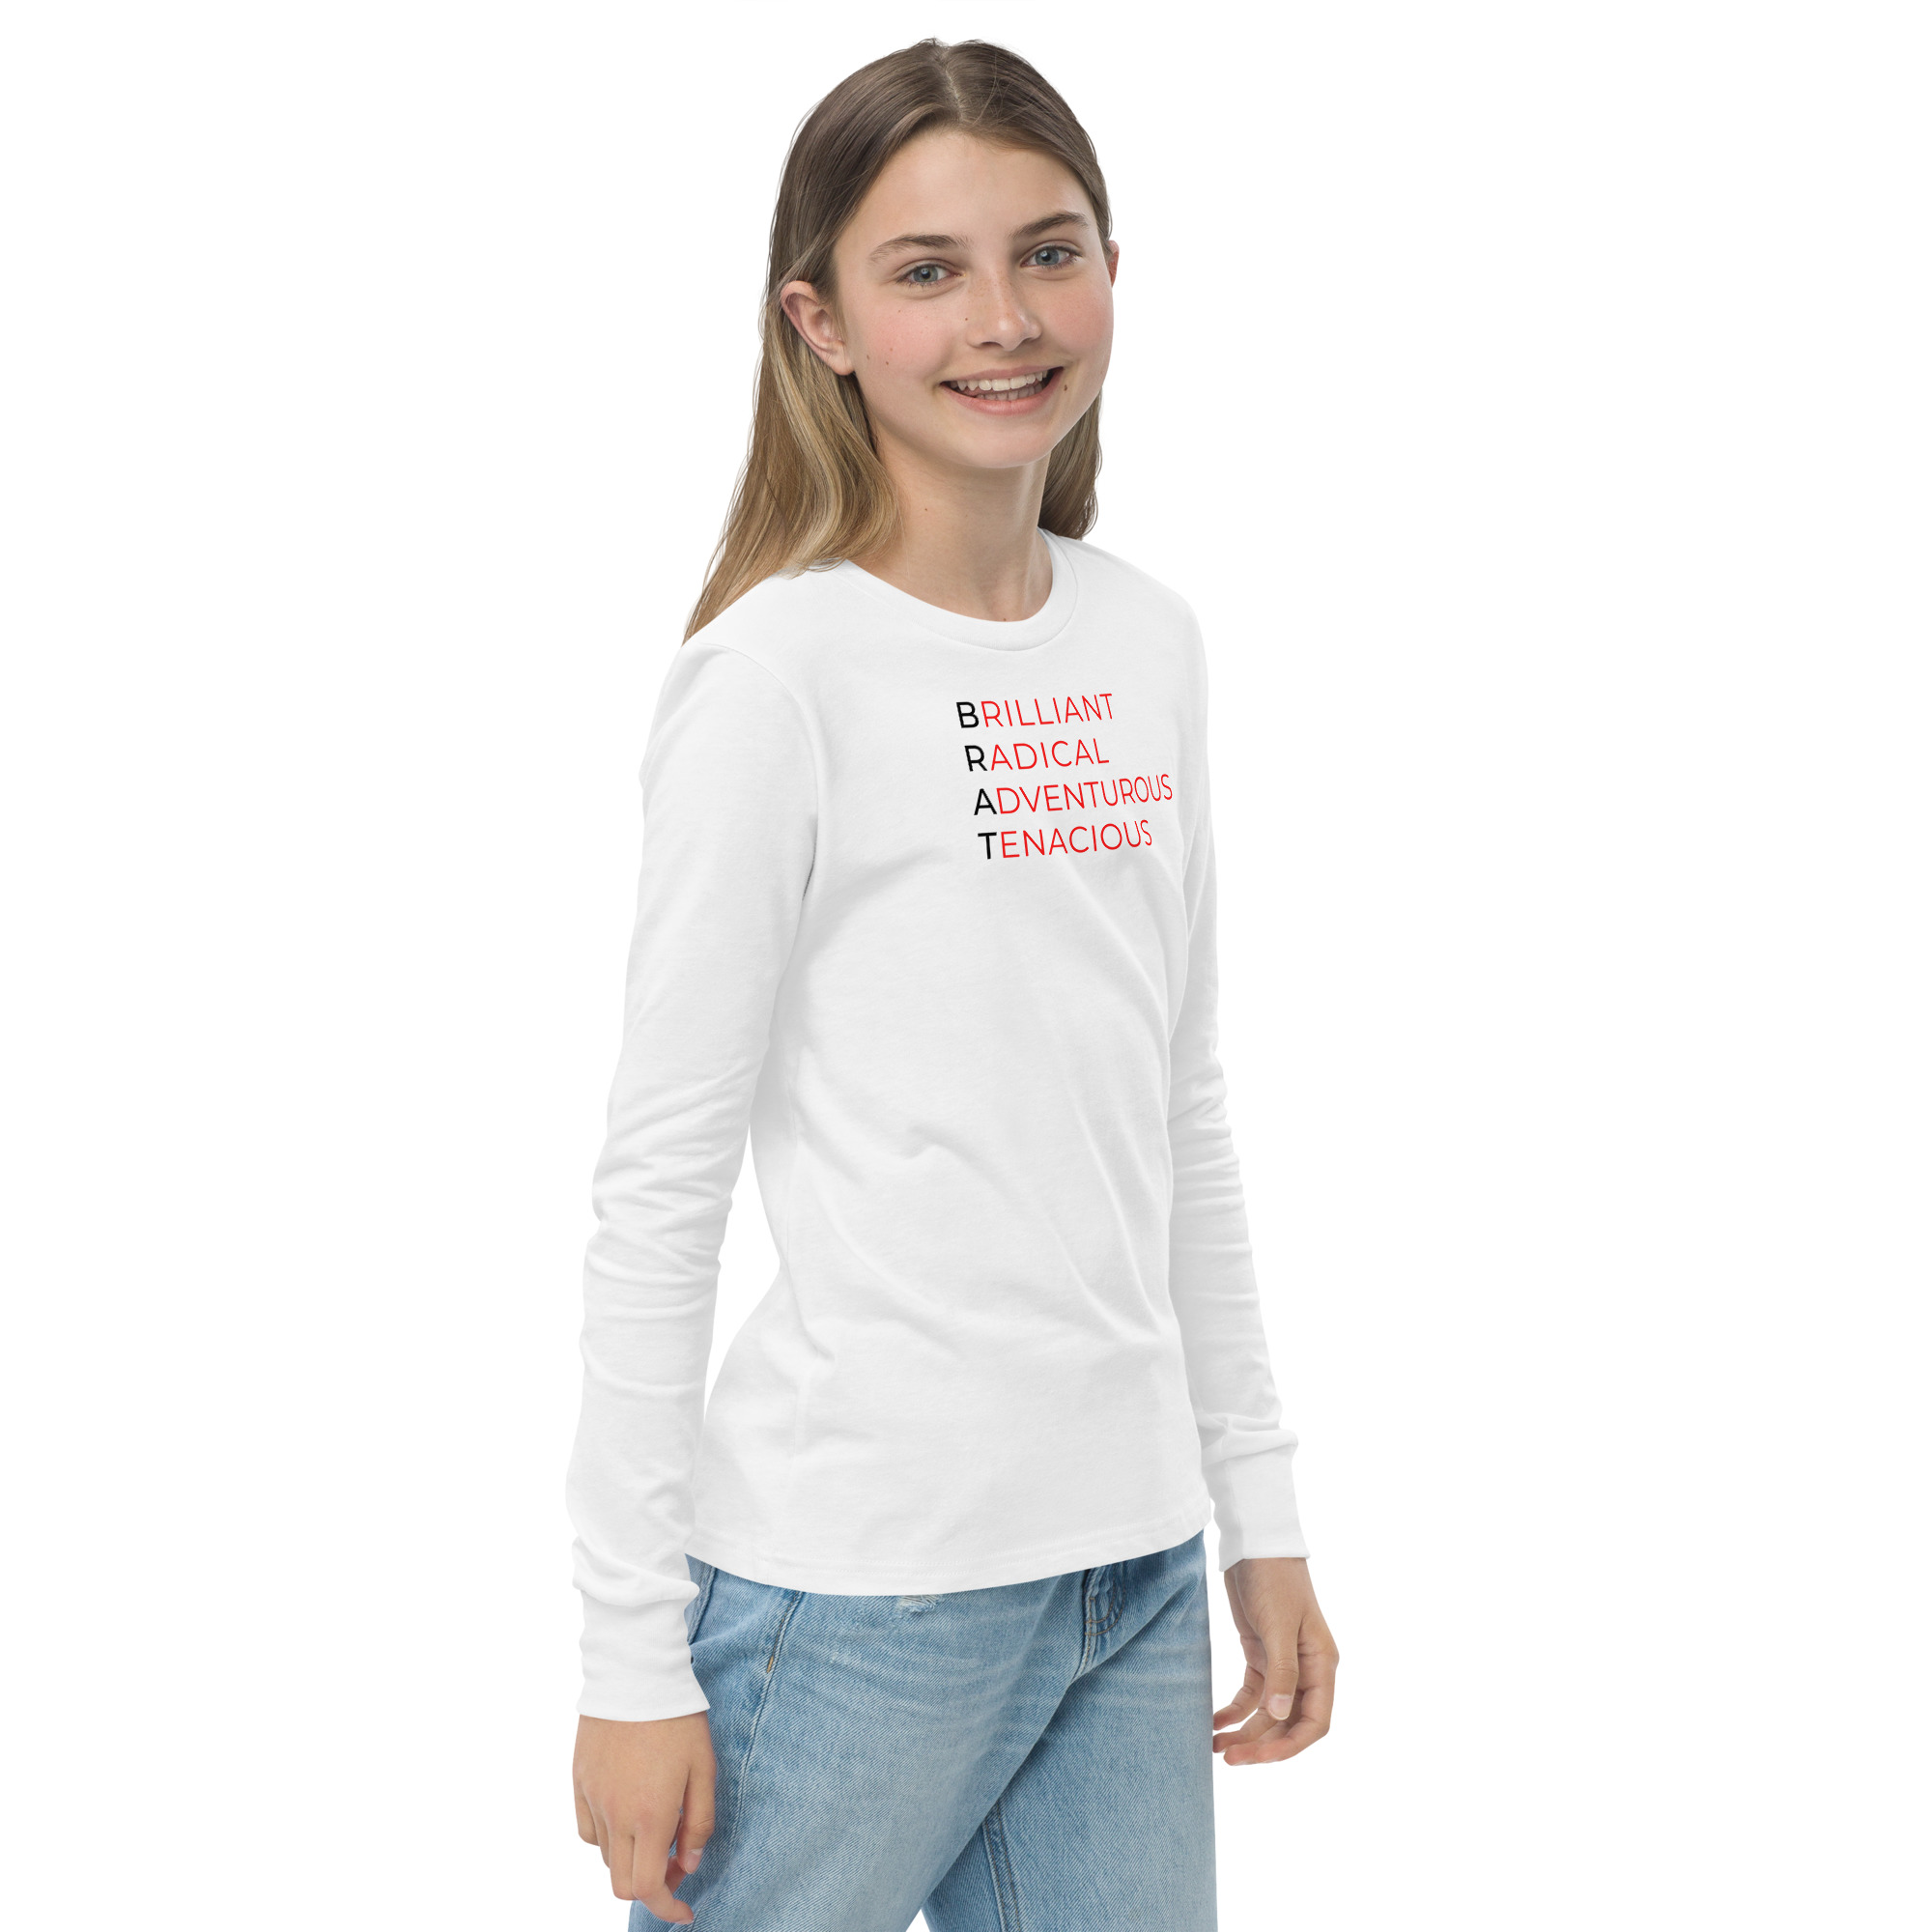 youth-long-sleeve-tee-white-right-front-6384c46158005.jpg